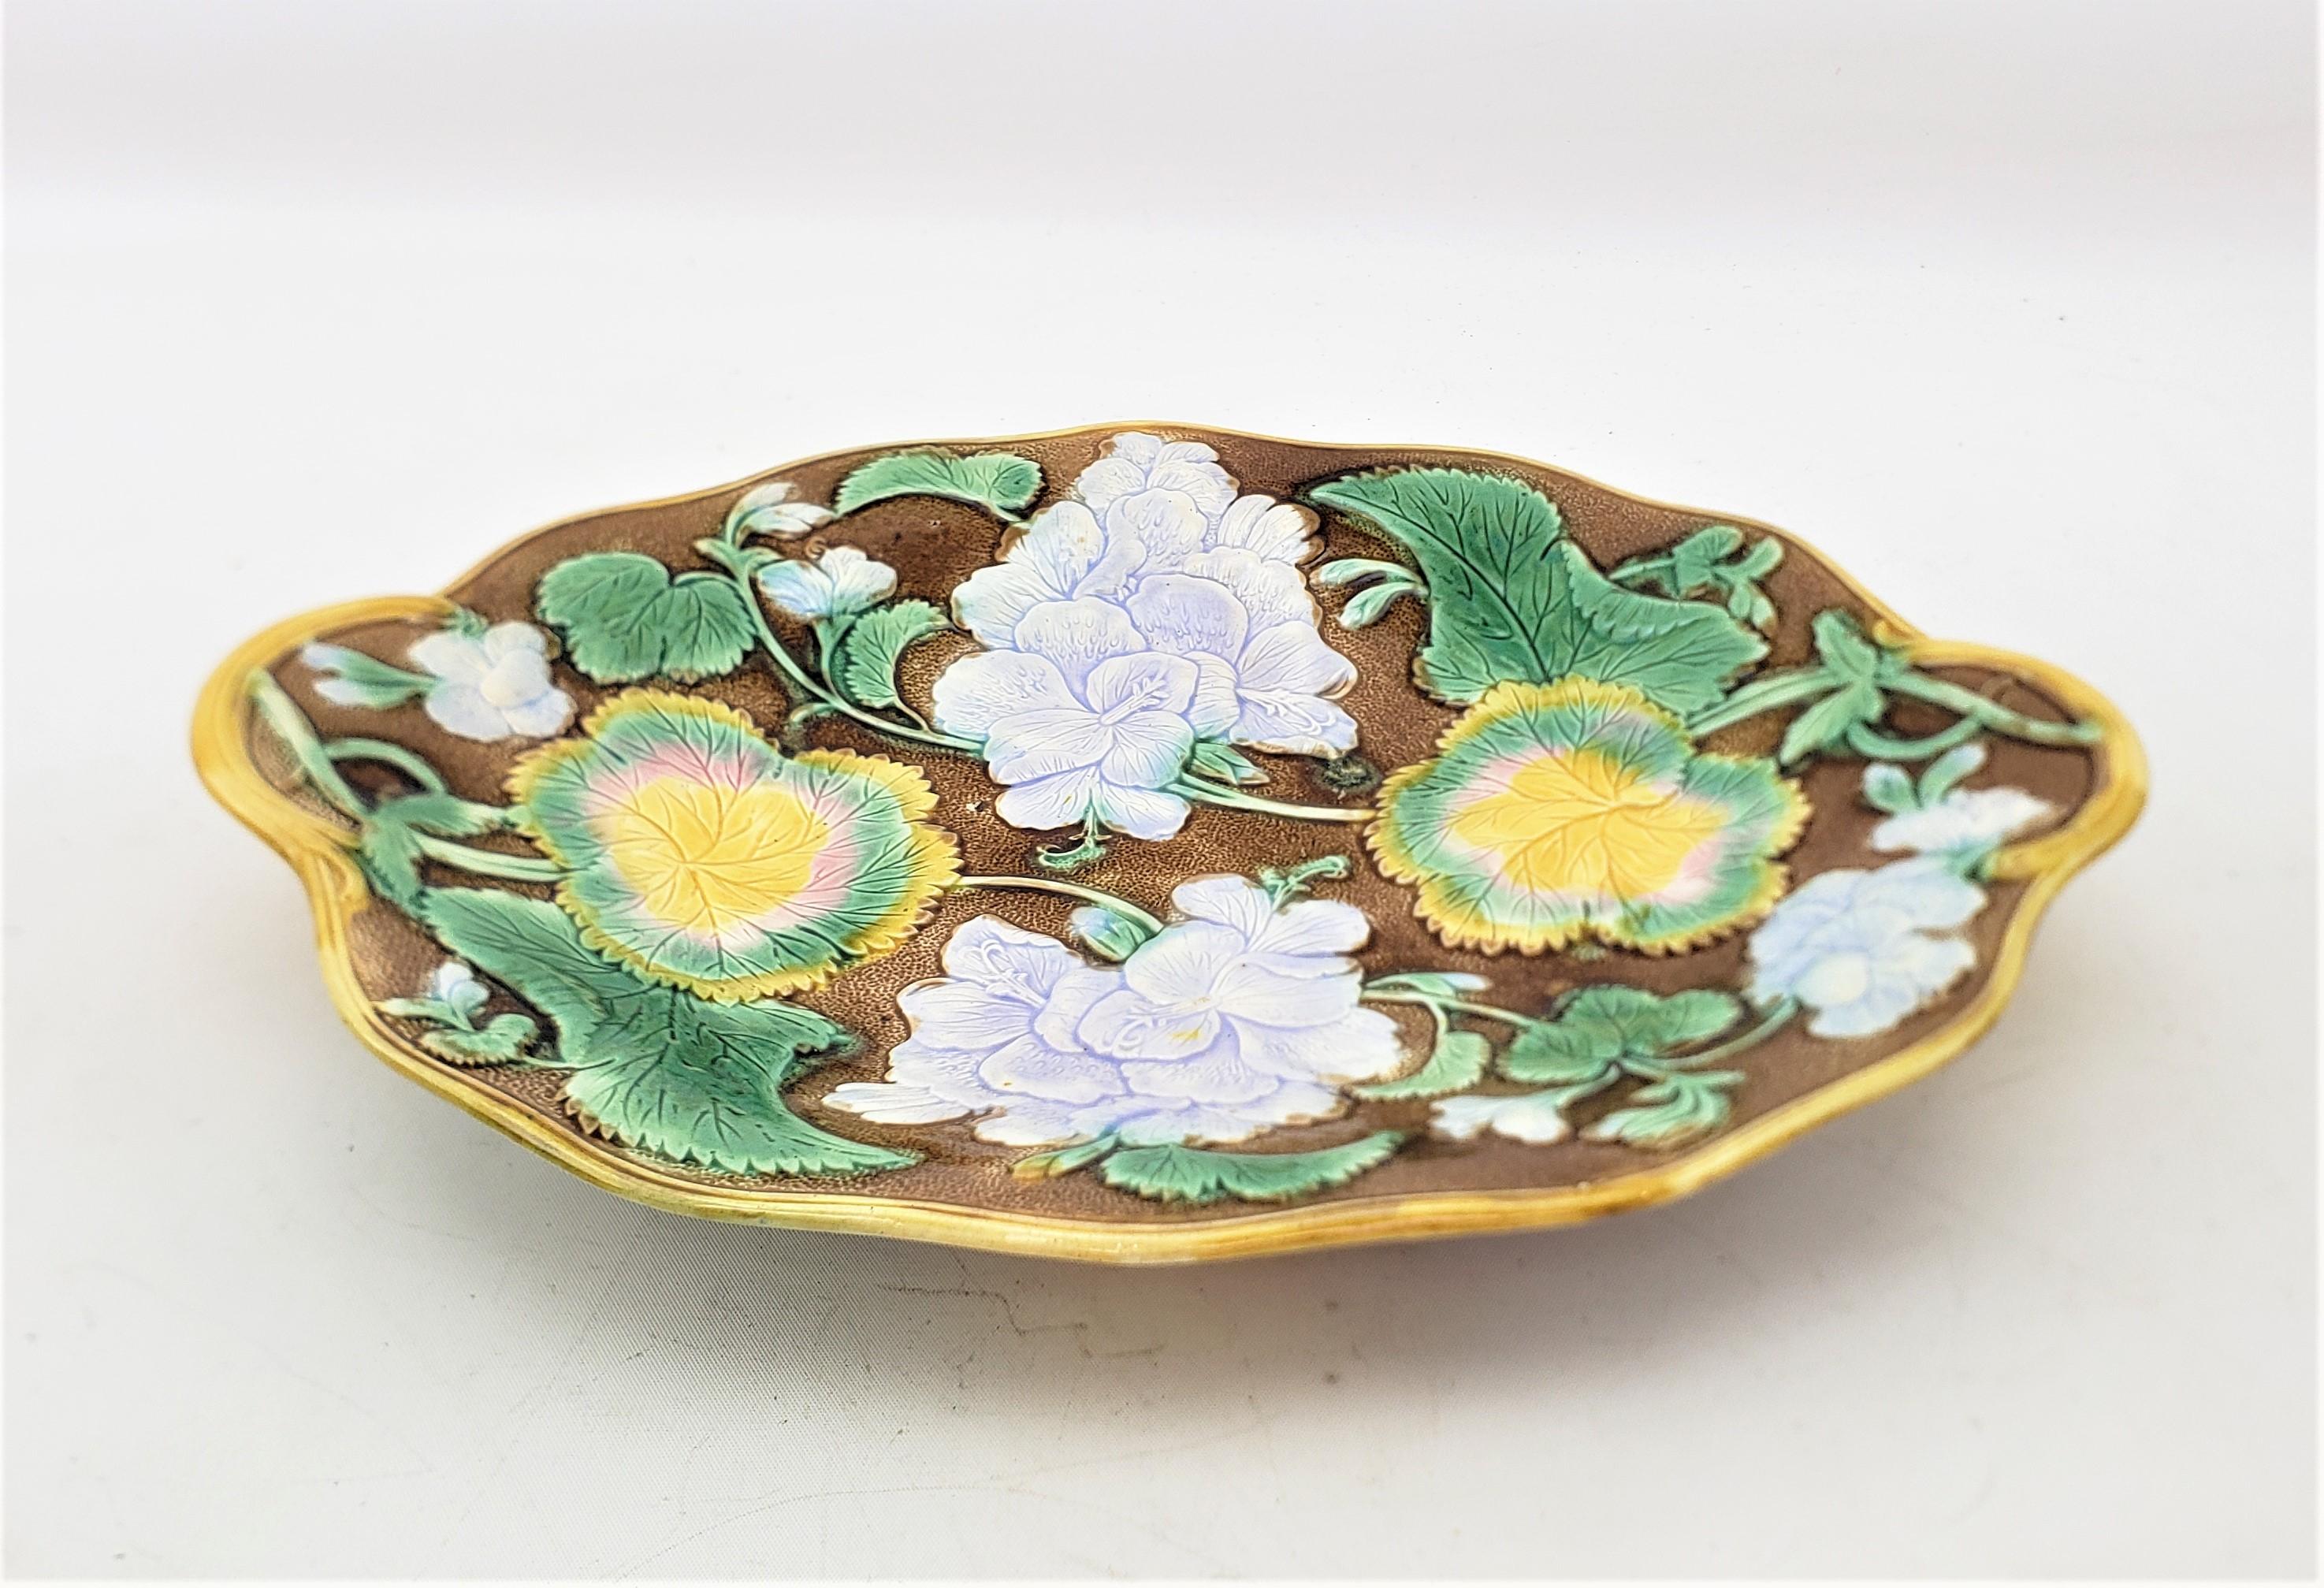 19th Century Small Antique Majolica Serving Dish or Platter with Leaf & Flower Decoration For Sale